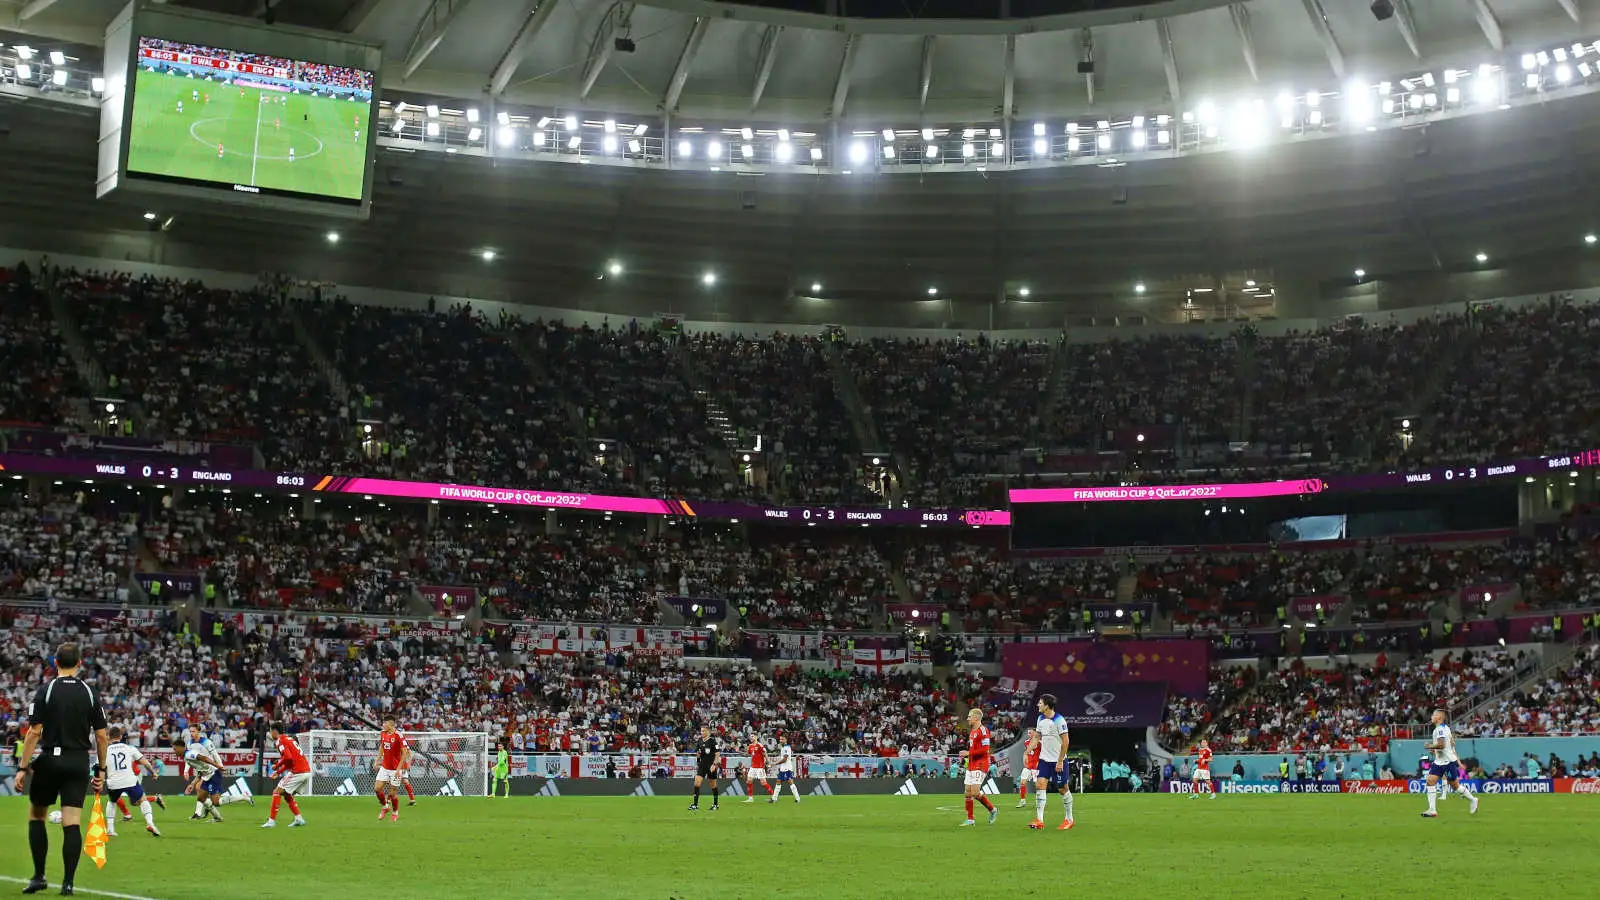 England play Wales at the 2022 FIFA World Cup